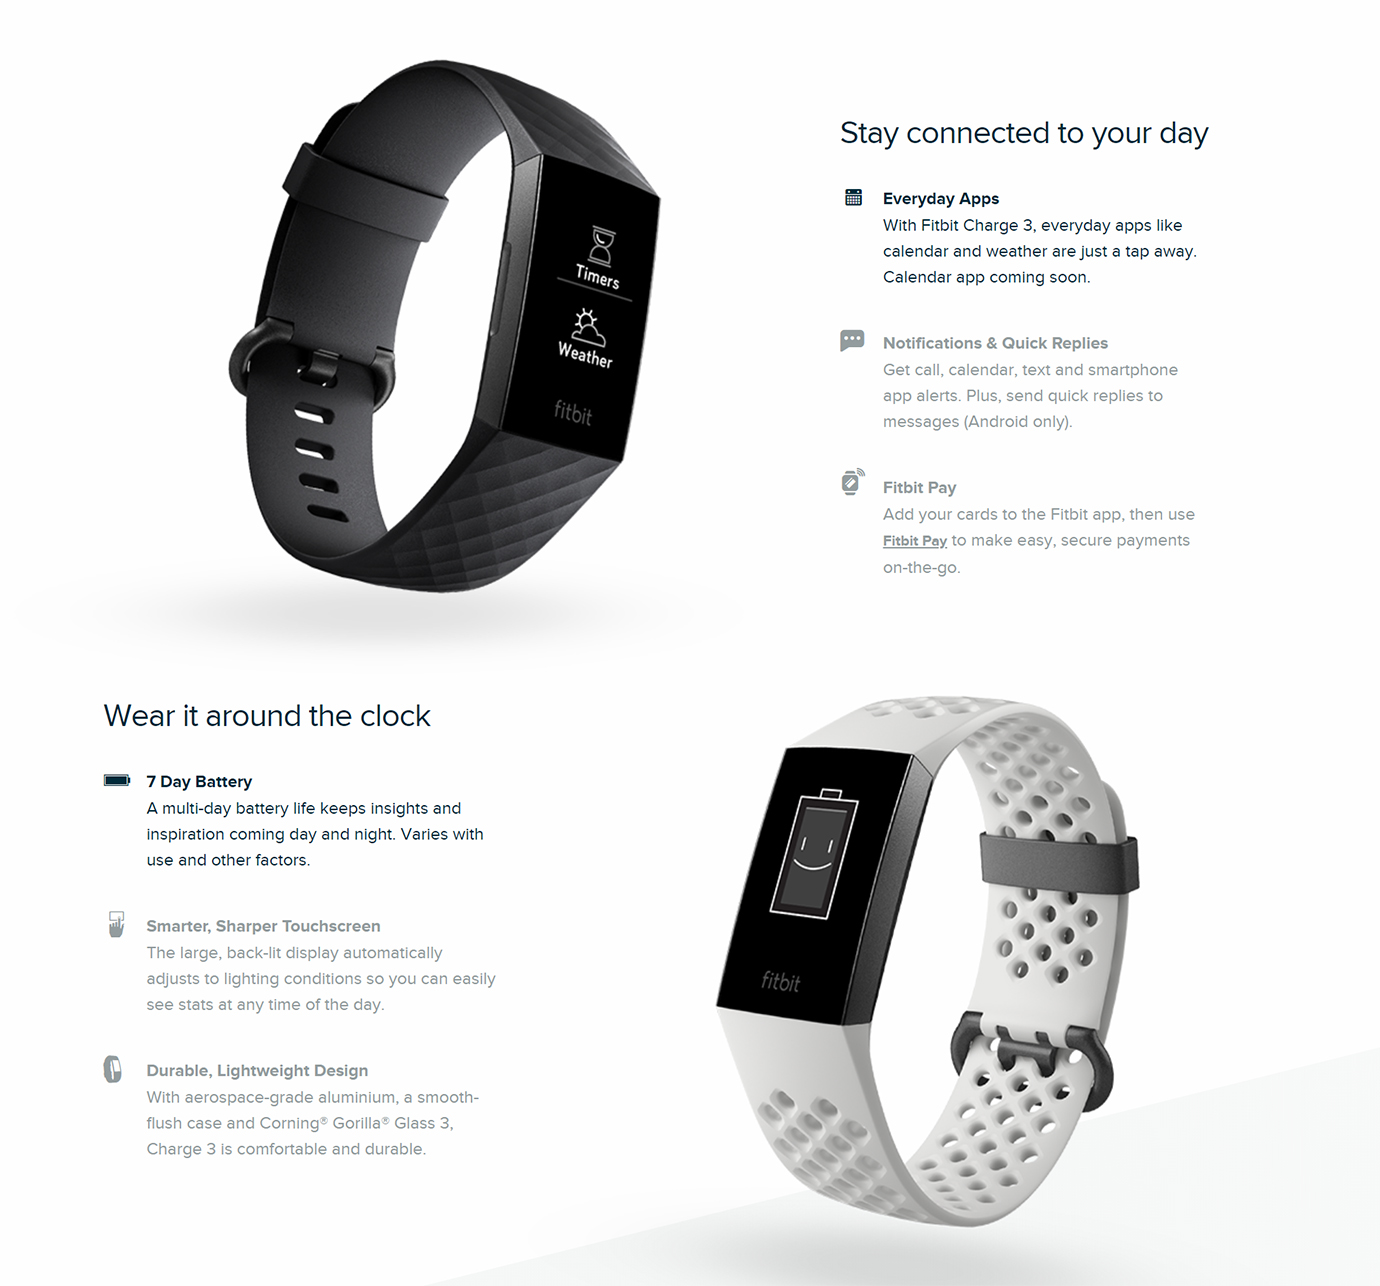 is the fitbit charge 3 compatible with iphone